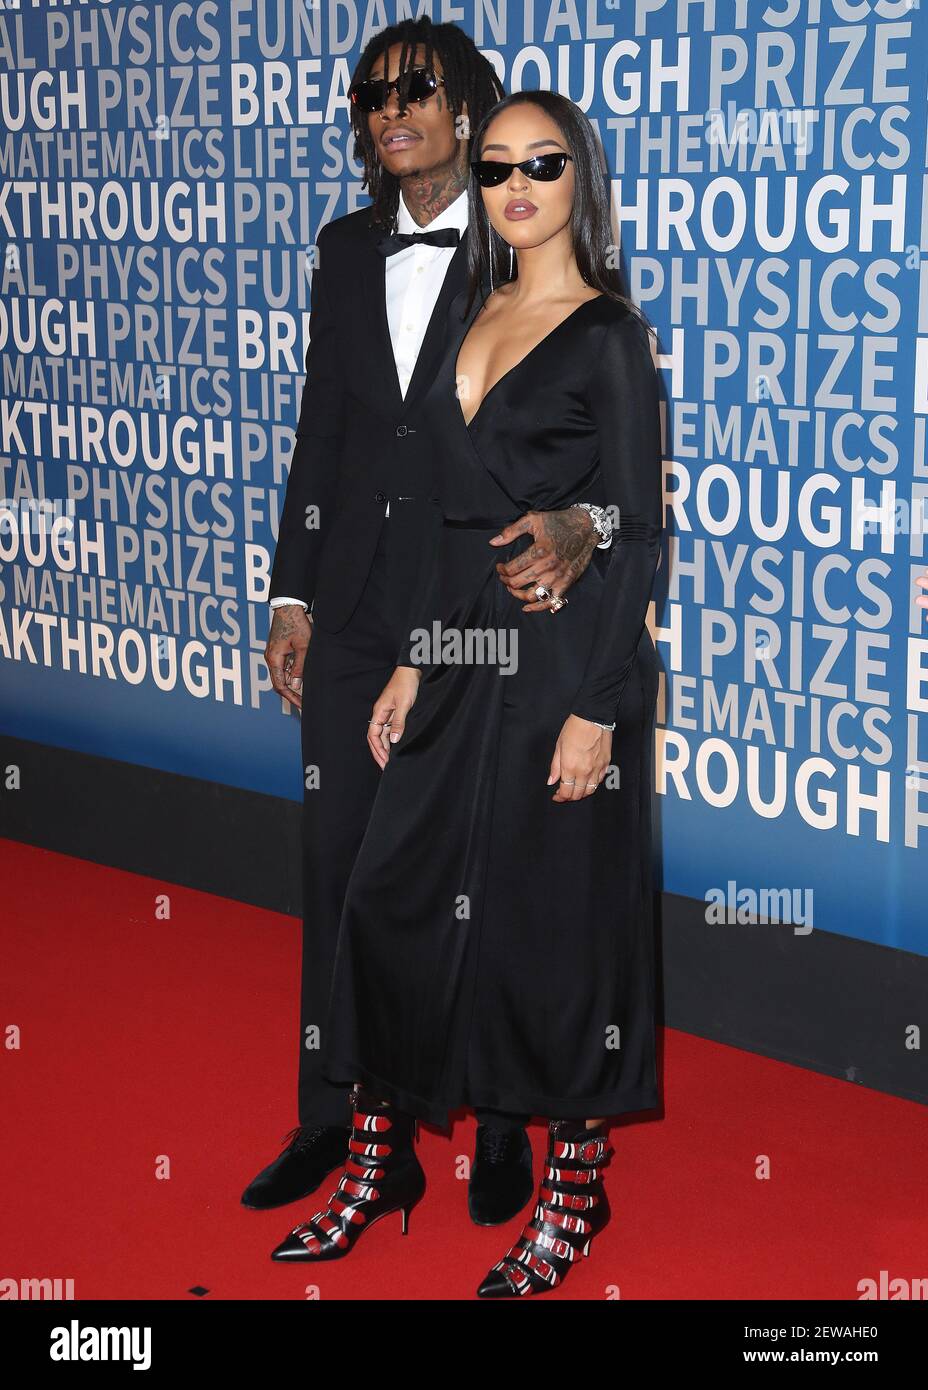 MOUNTAIN VIEW, CA - DECEMBER 3: Wiz Kalifa and Izabela Guedes at the 6th  Annual Breakthrough Prize at NASA Ames Research Center on December 3, 2017  in Mountain View, California. (Photo by